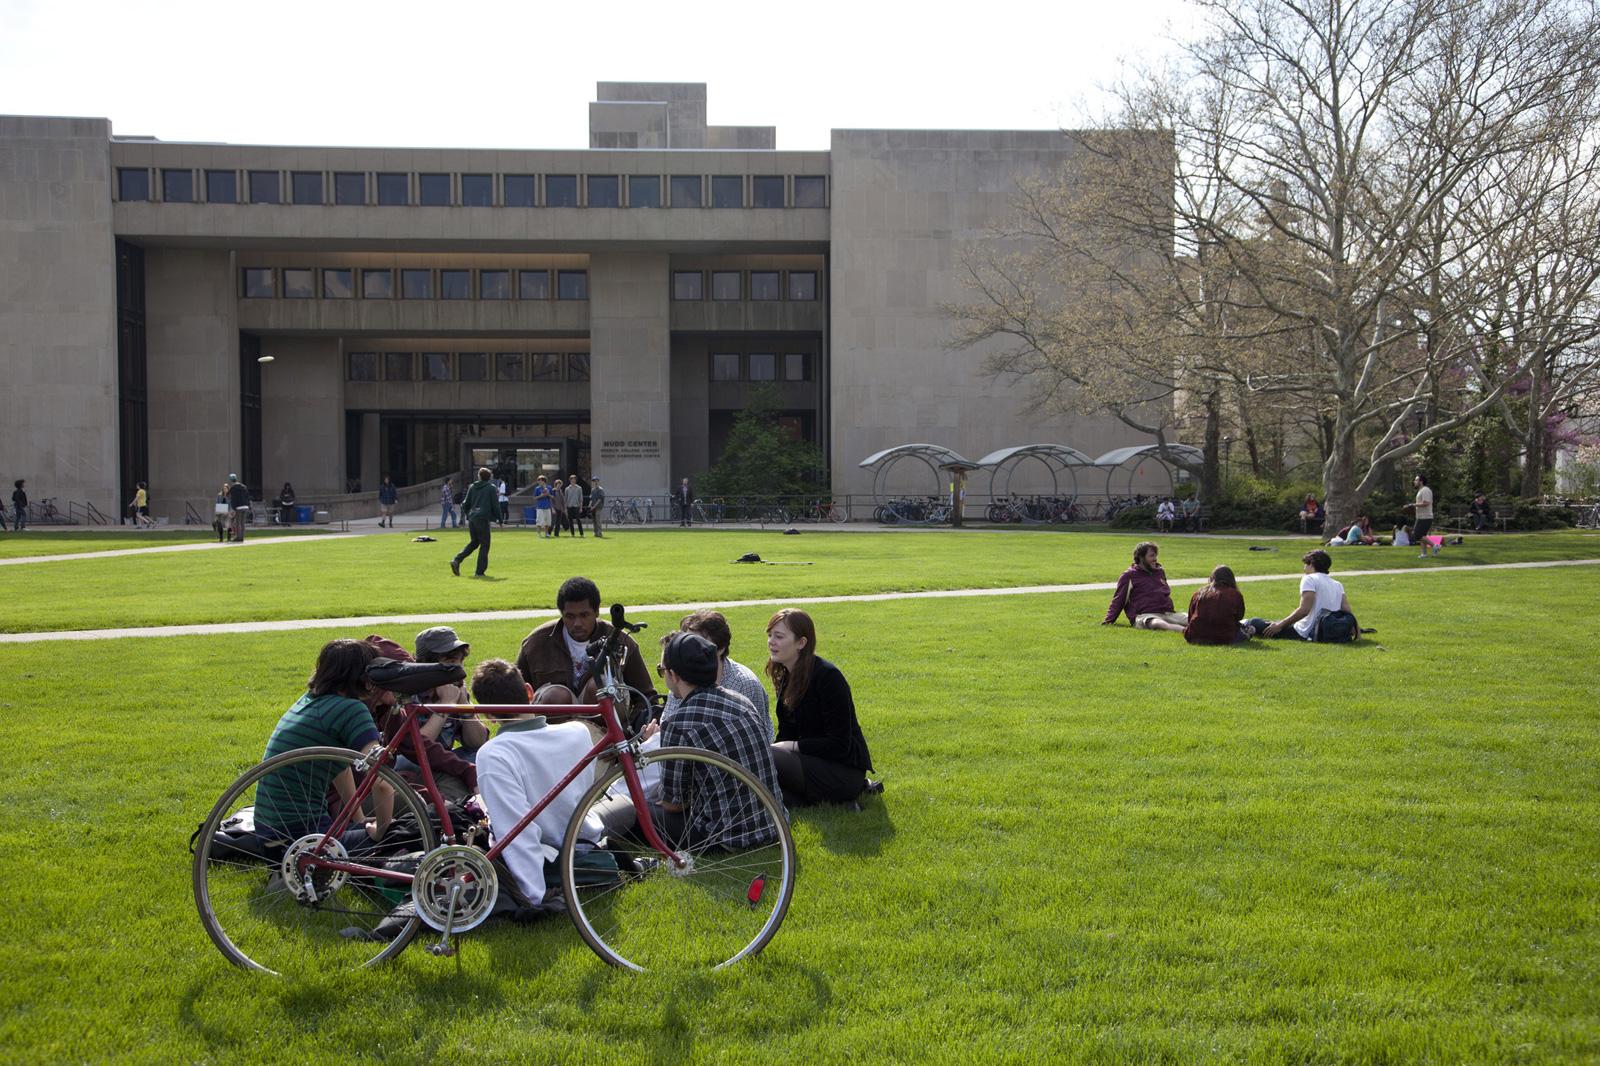 Students in the grass outside the library.